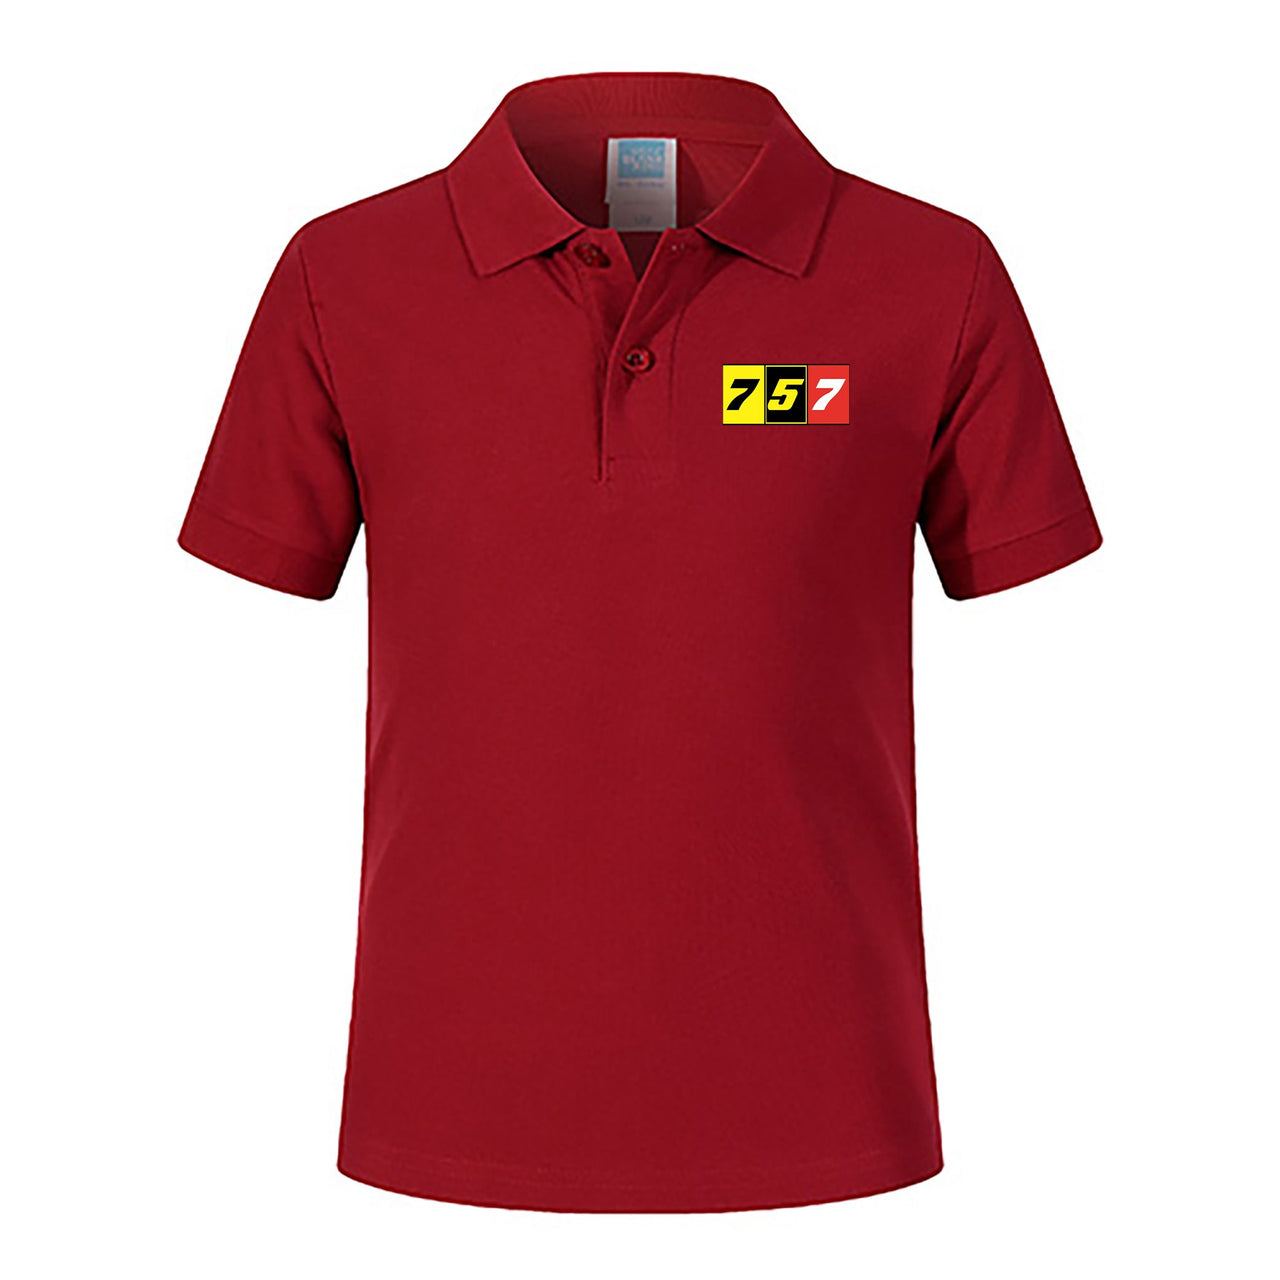 Flat Colourful 757 Designed Children Polo T-Shirts